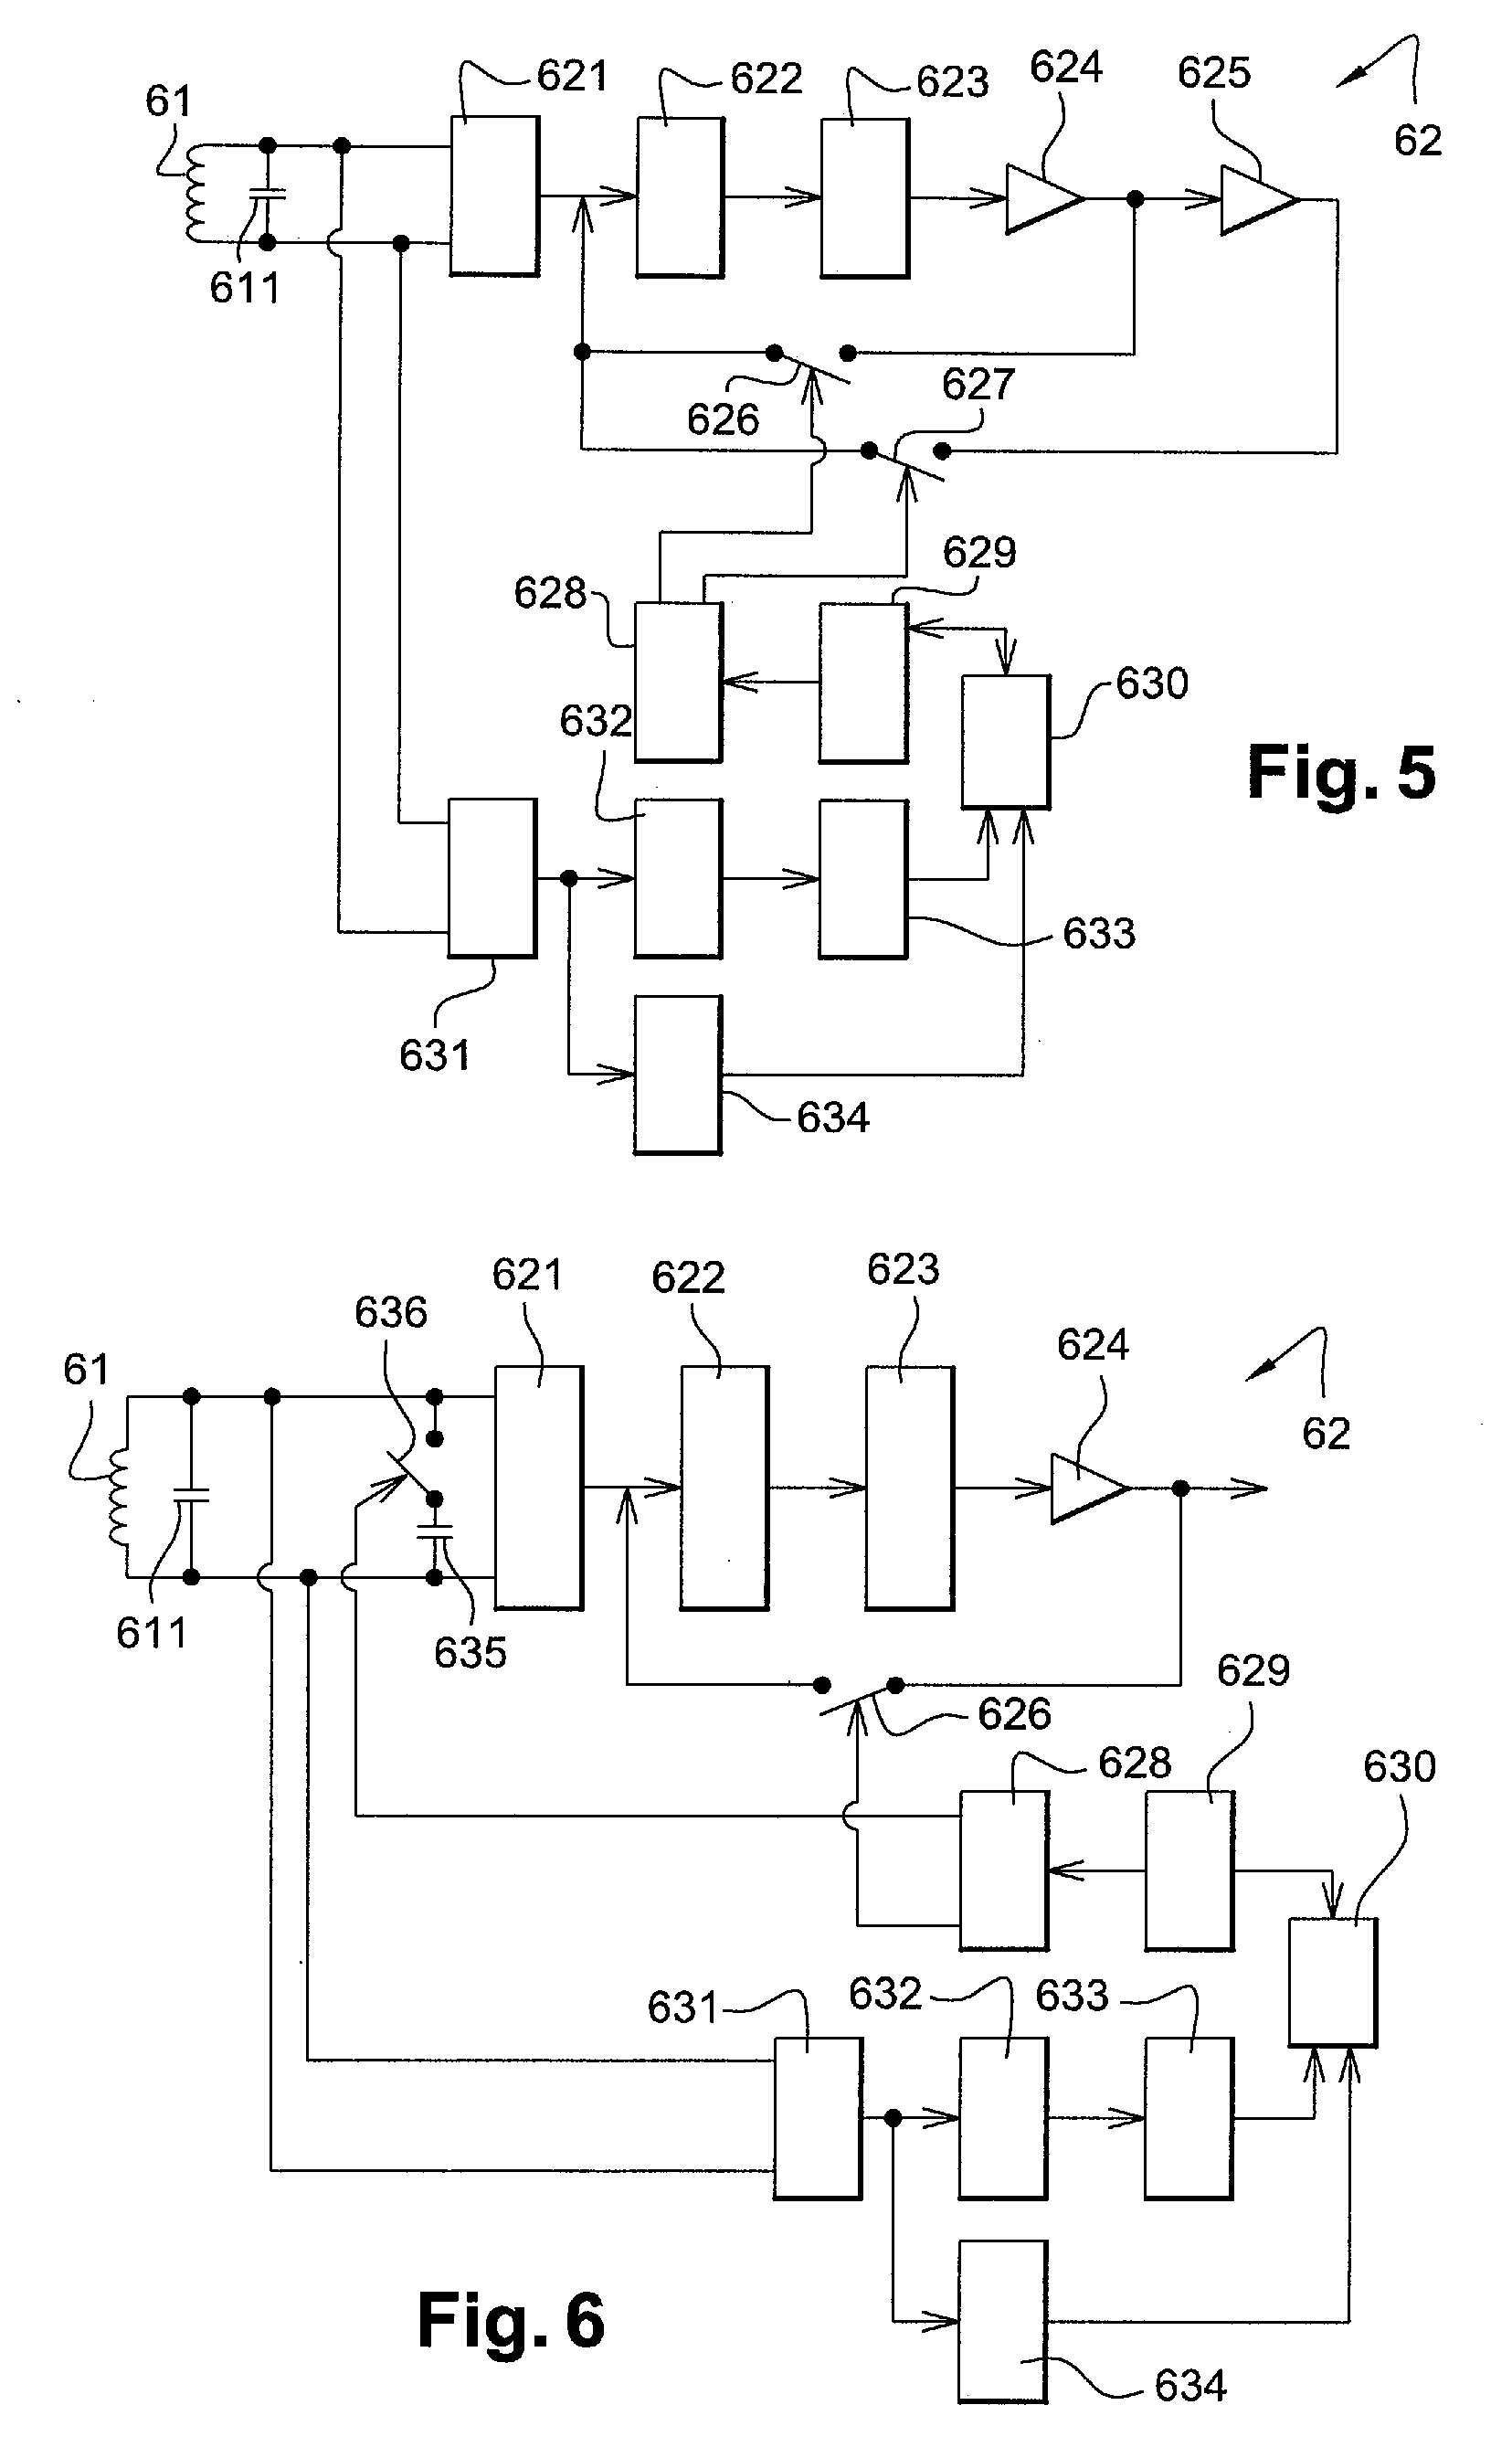 Radio-frequency communication device, system and method